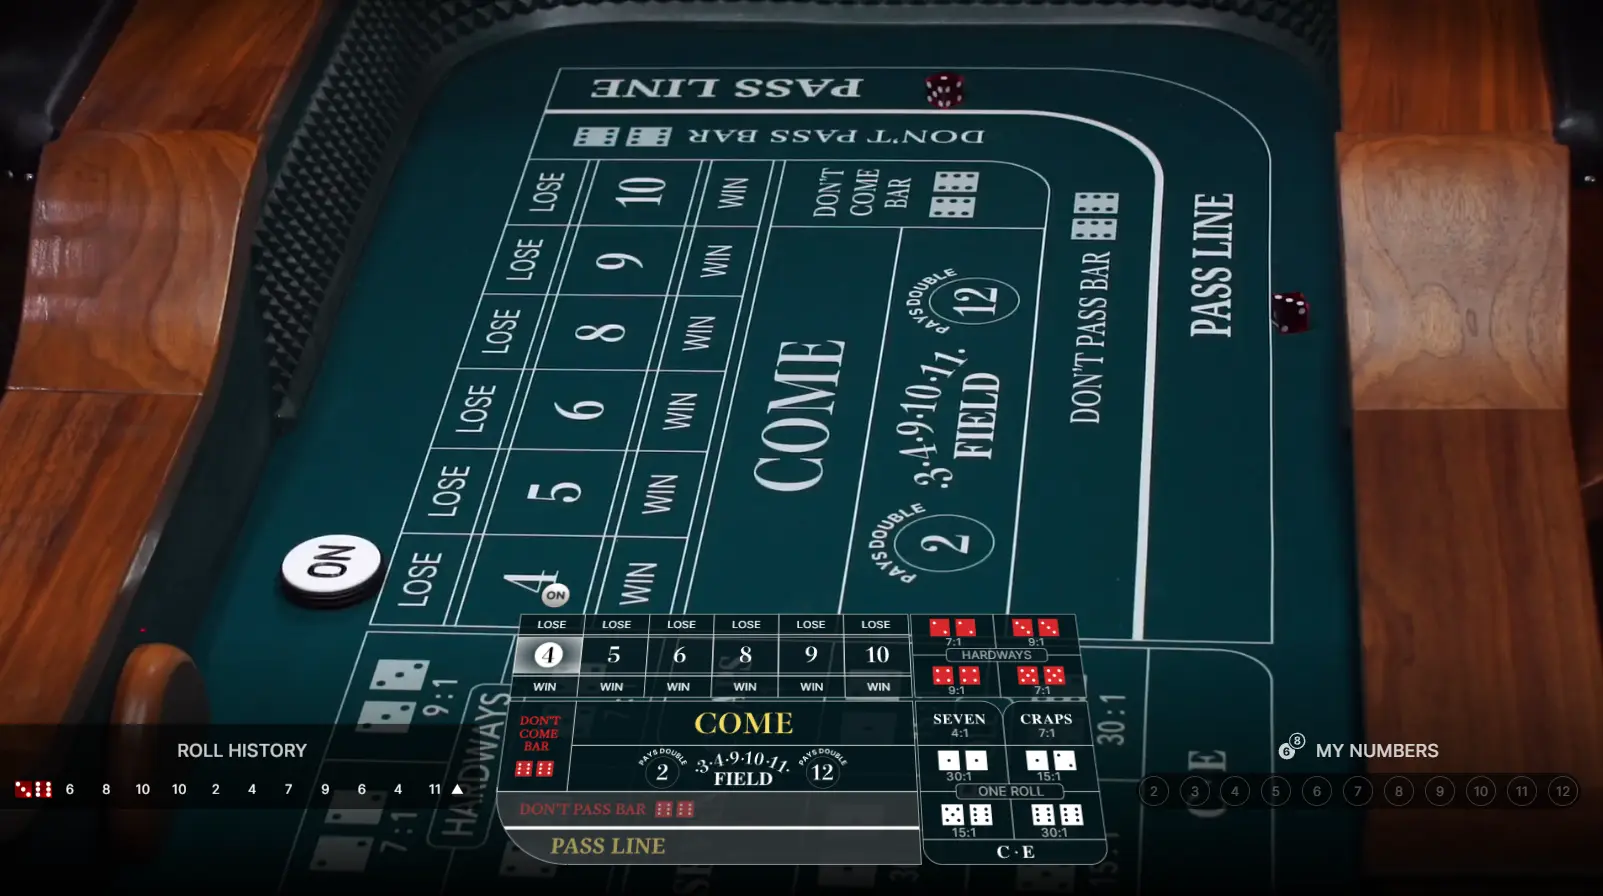 For craps fans and live gaming supporters alike, this is a must-try game